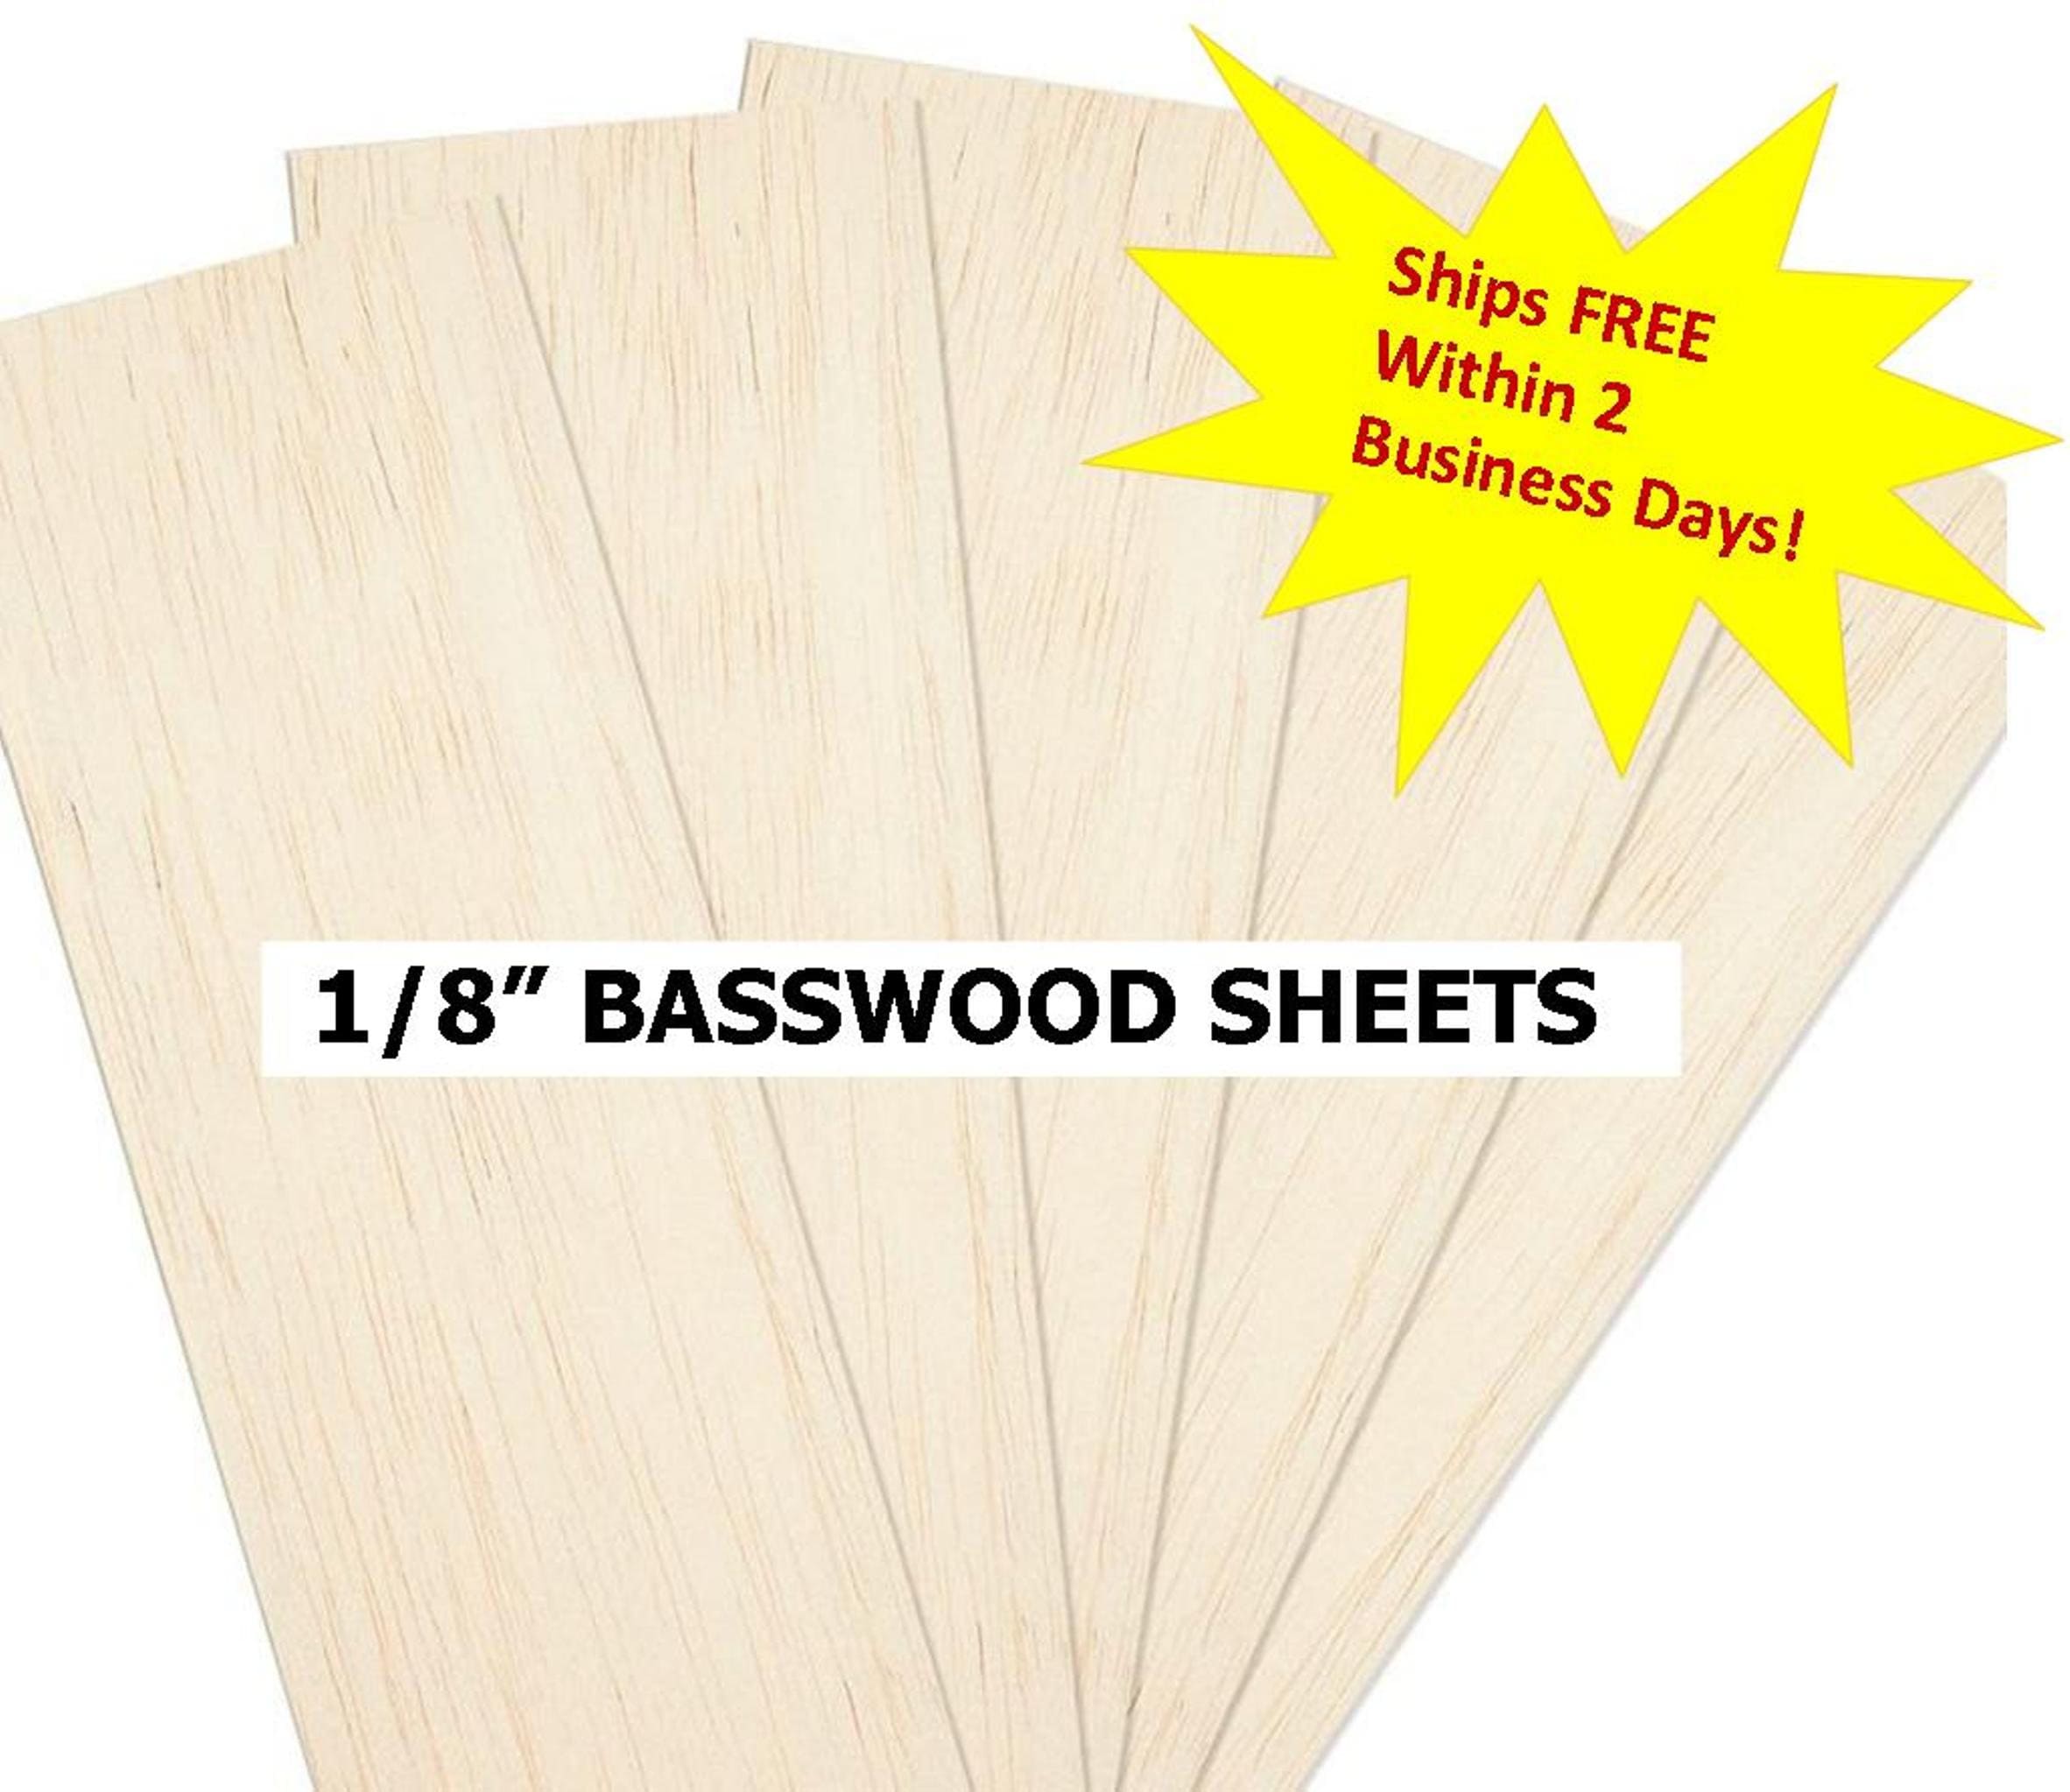 12 Pcs Basswood Sheets 3mm 1/8 x 12 x 18 Plywood Board Craft Wood Thin  Wood Sheets for DIY Arts Crafts Woodworking Scroll Sawing Projects Painting